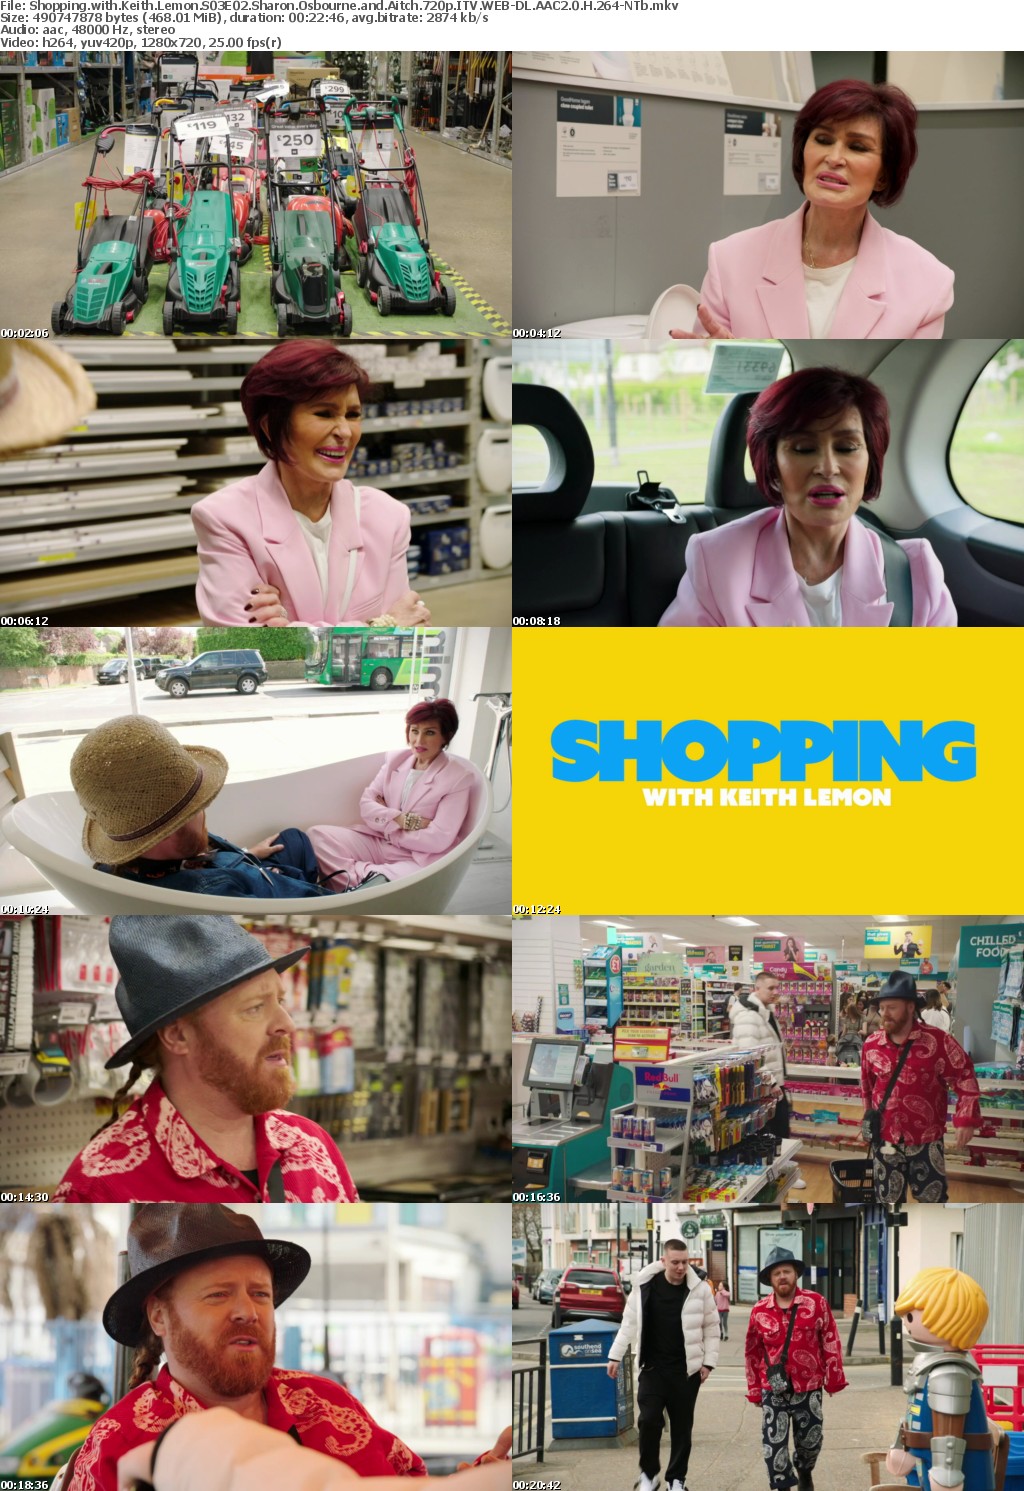 Shopping with Keith Lemon S03E02 Sharon Osbourne and Aitch 720p ITV WEB-DL AAC2 0 H 264-NTb